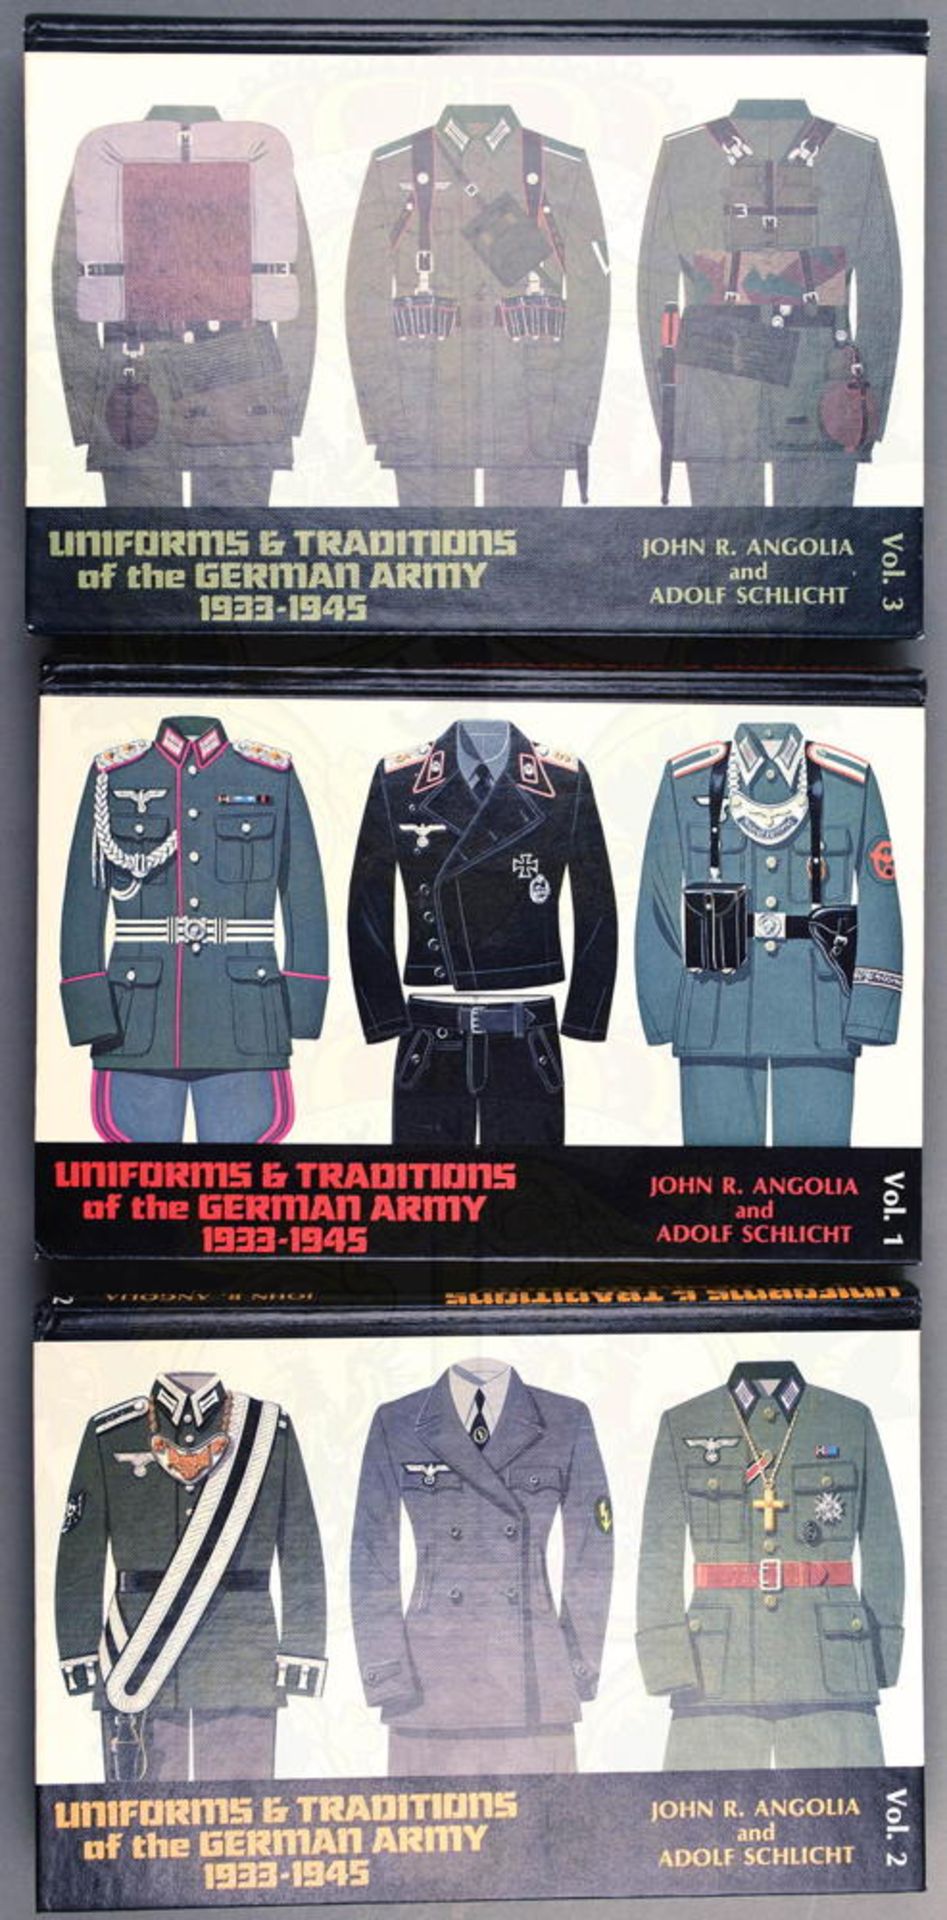 UNIFORMS AND TRADITIONS OF THE GERMAN ARMY